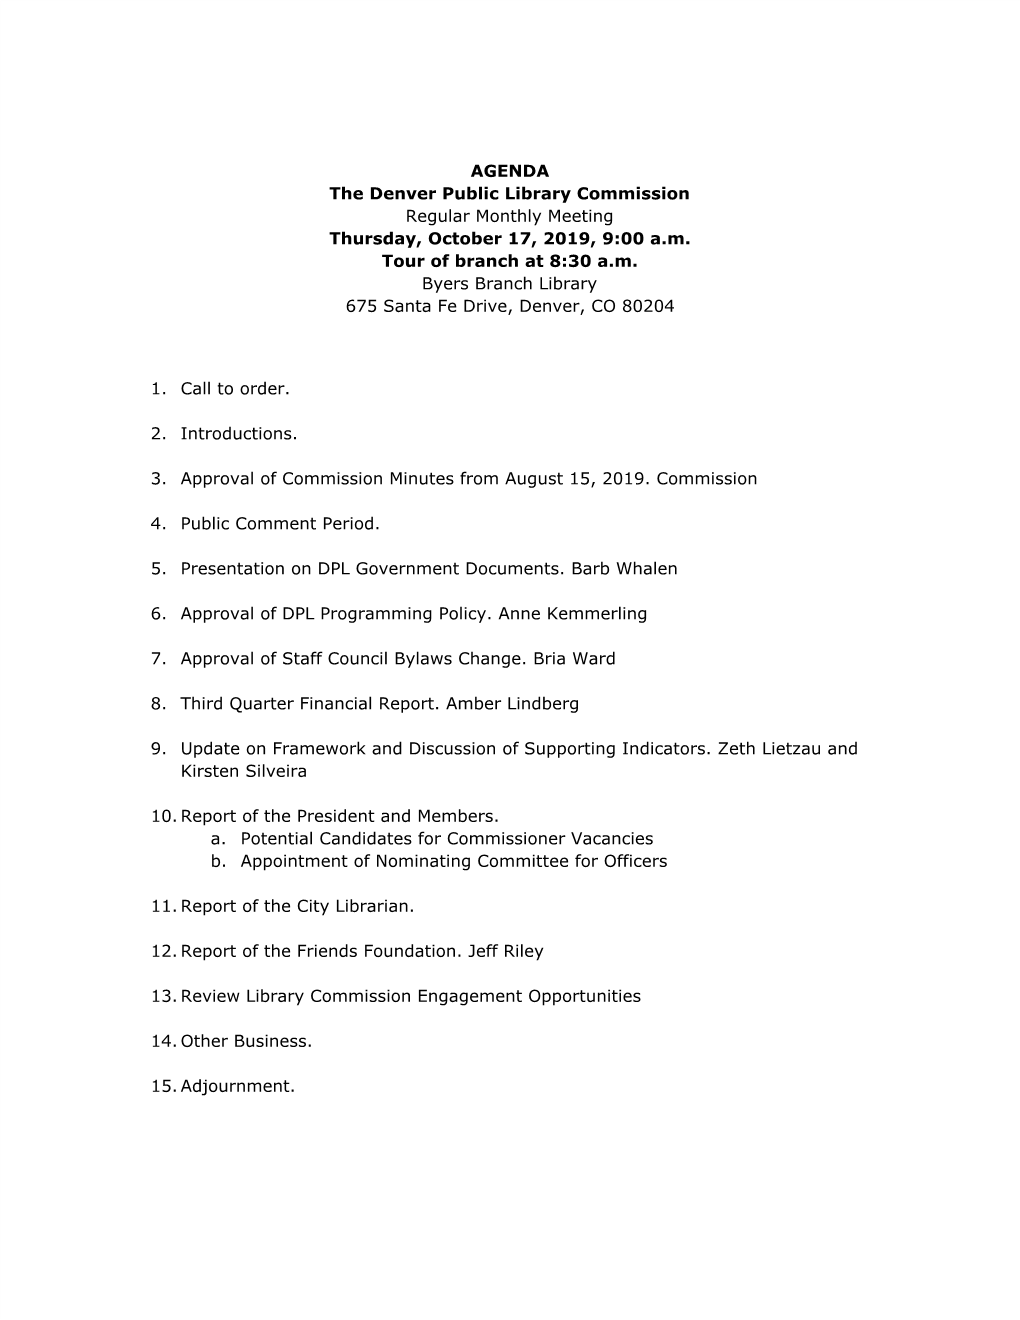 AGENDA the Denver Public Library Commission Regular Monthly Meeting Thursday, October 17, 2019, 9:00 A.M